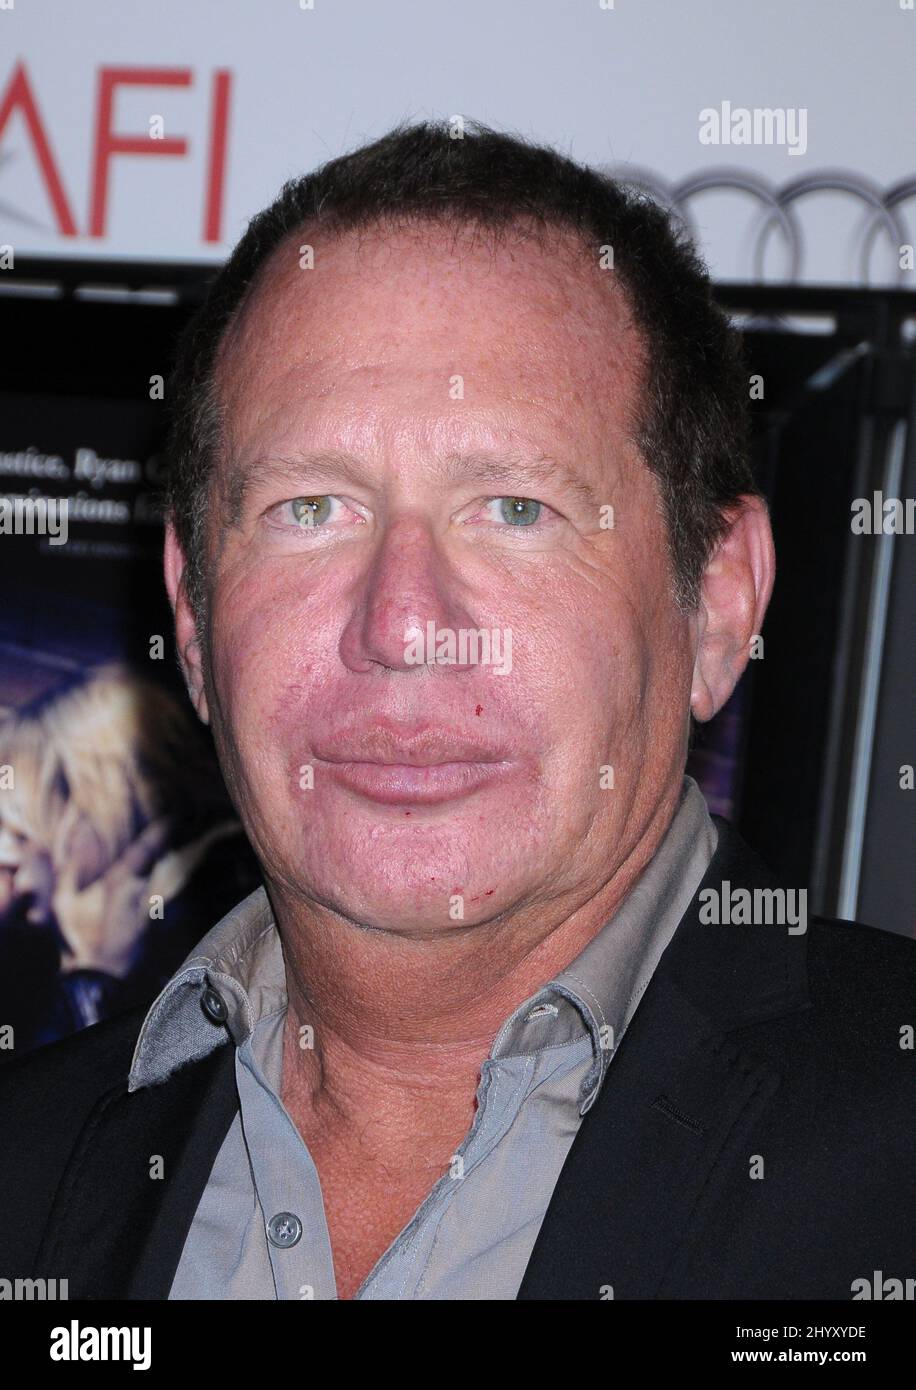 Garry Shandling at 'Blue Valentine' centerpiece gala screening at AFI Fest 2010 screening at AFI Fest 2010 presented by Audi held at the Egyptian Theatre, Los Angeles. Stock Photo